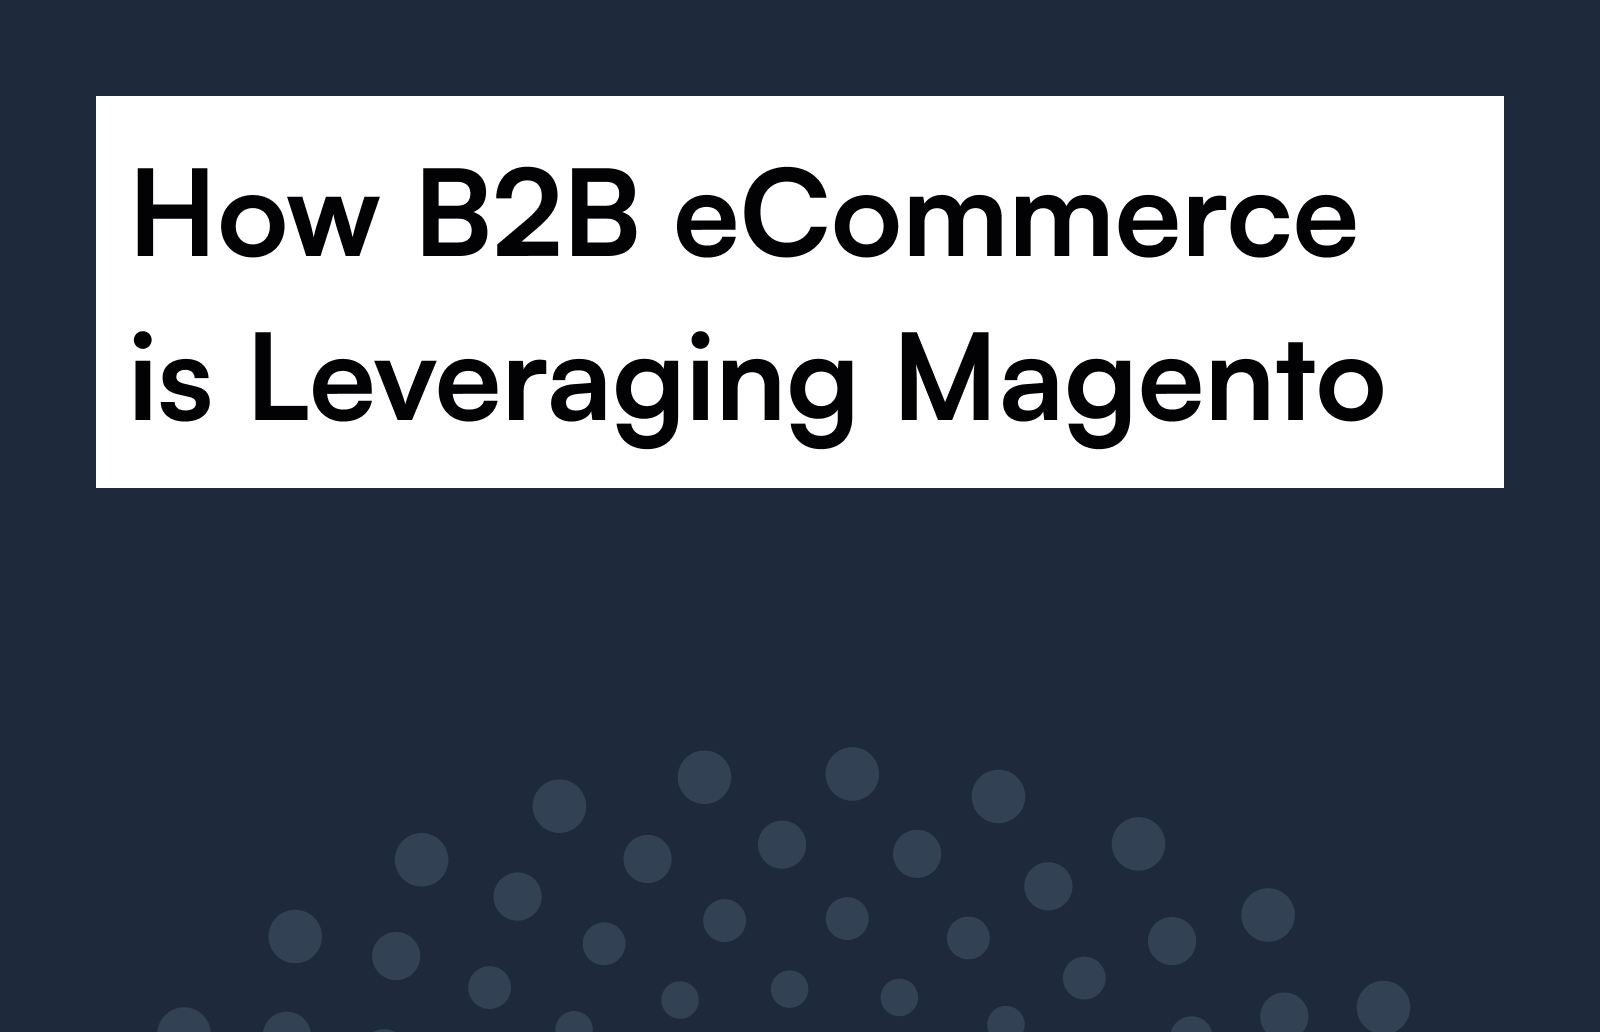 How B2B eCommerce is Leveraging Magento